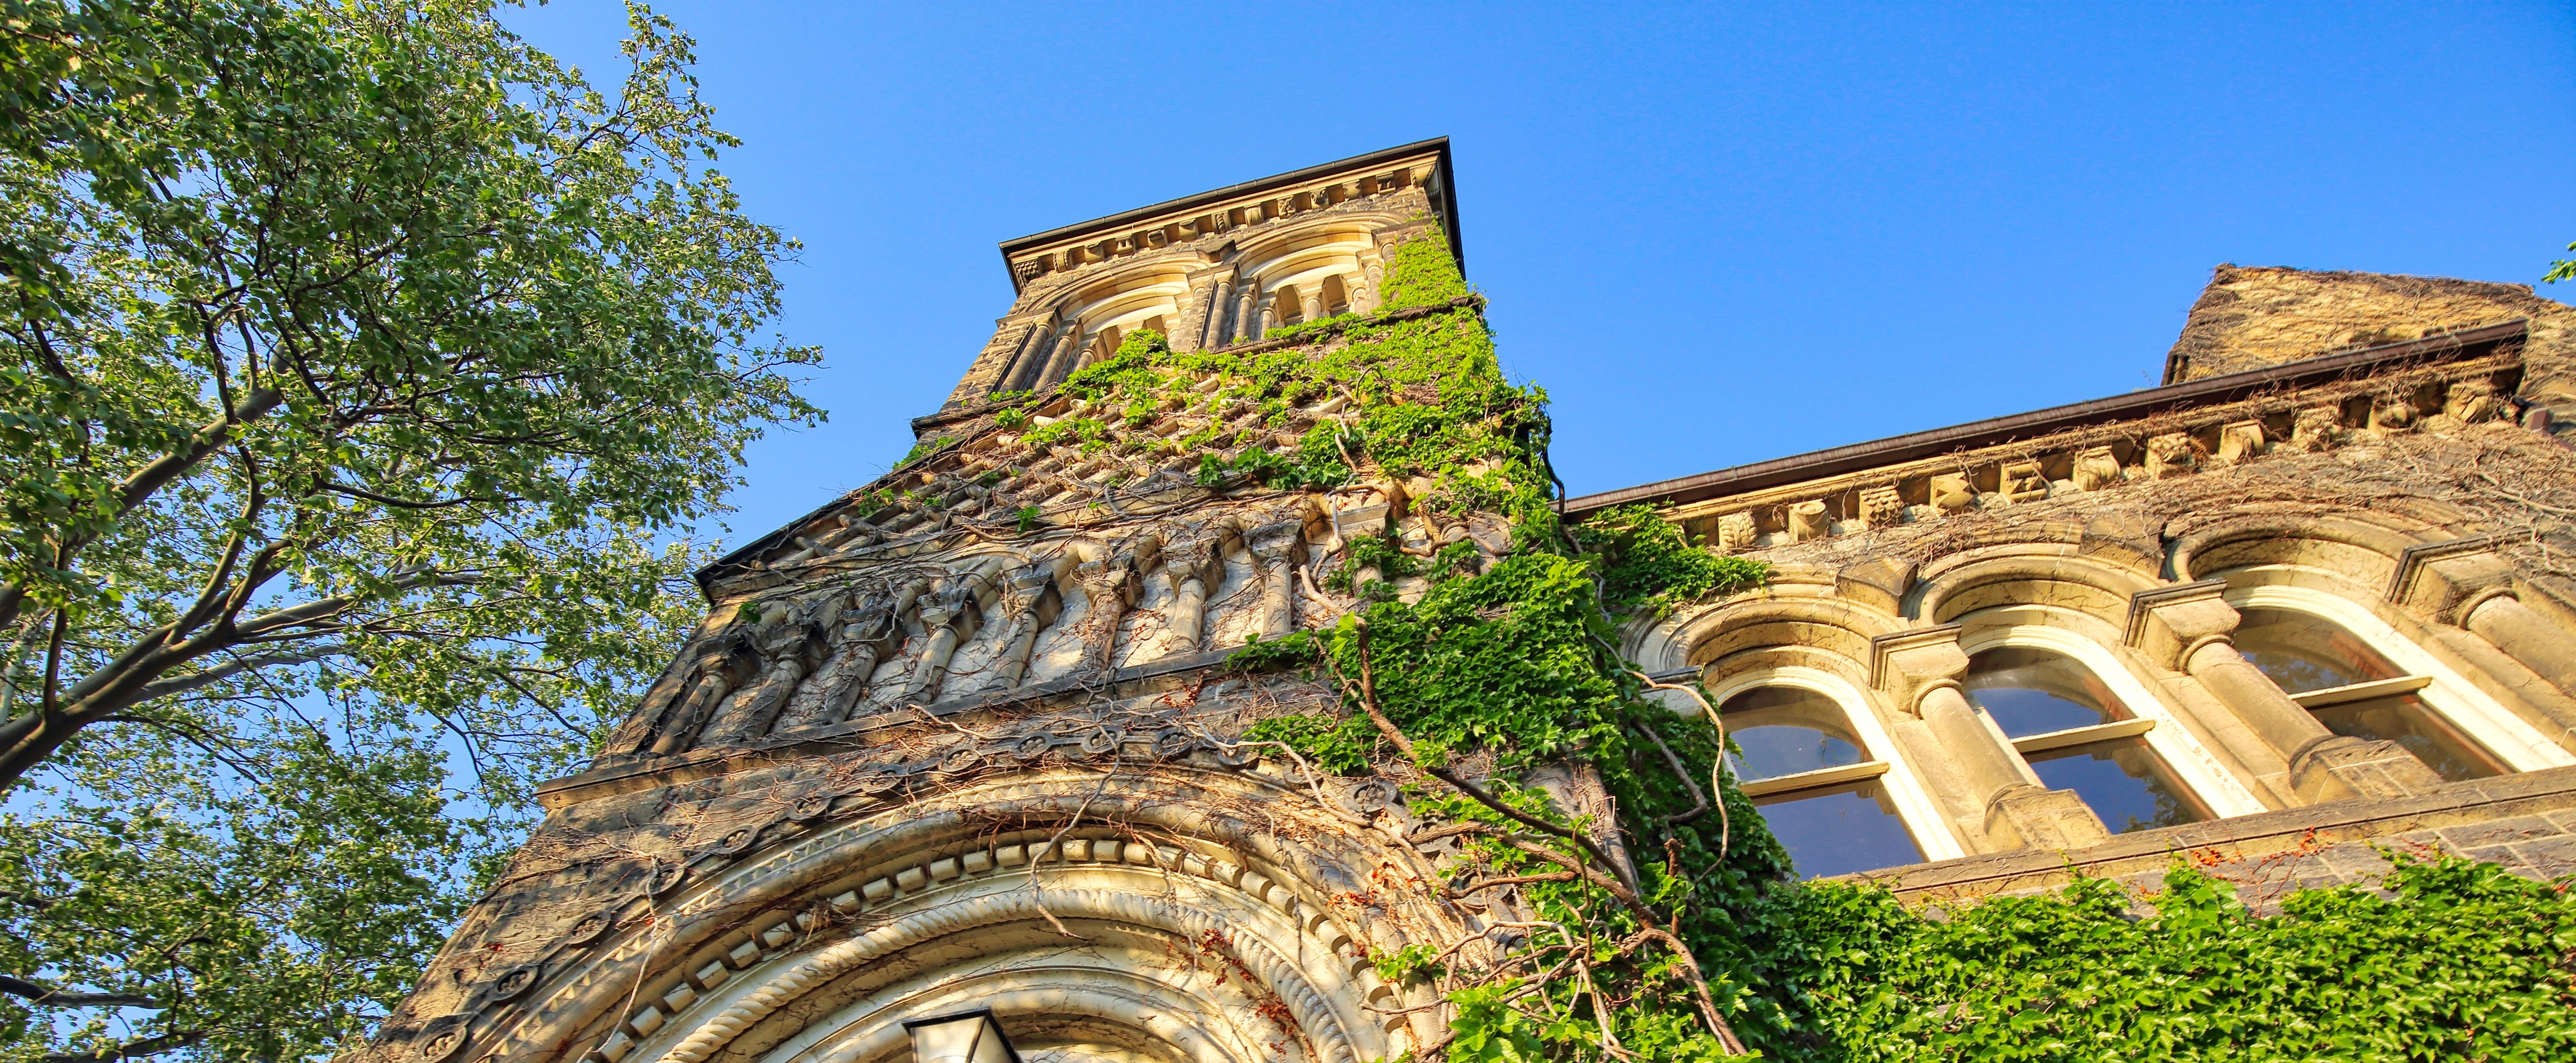 University of Toronto building covered in ivy vines